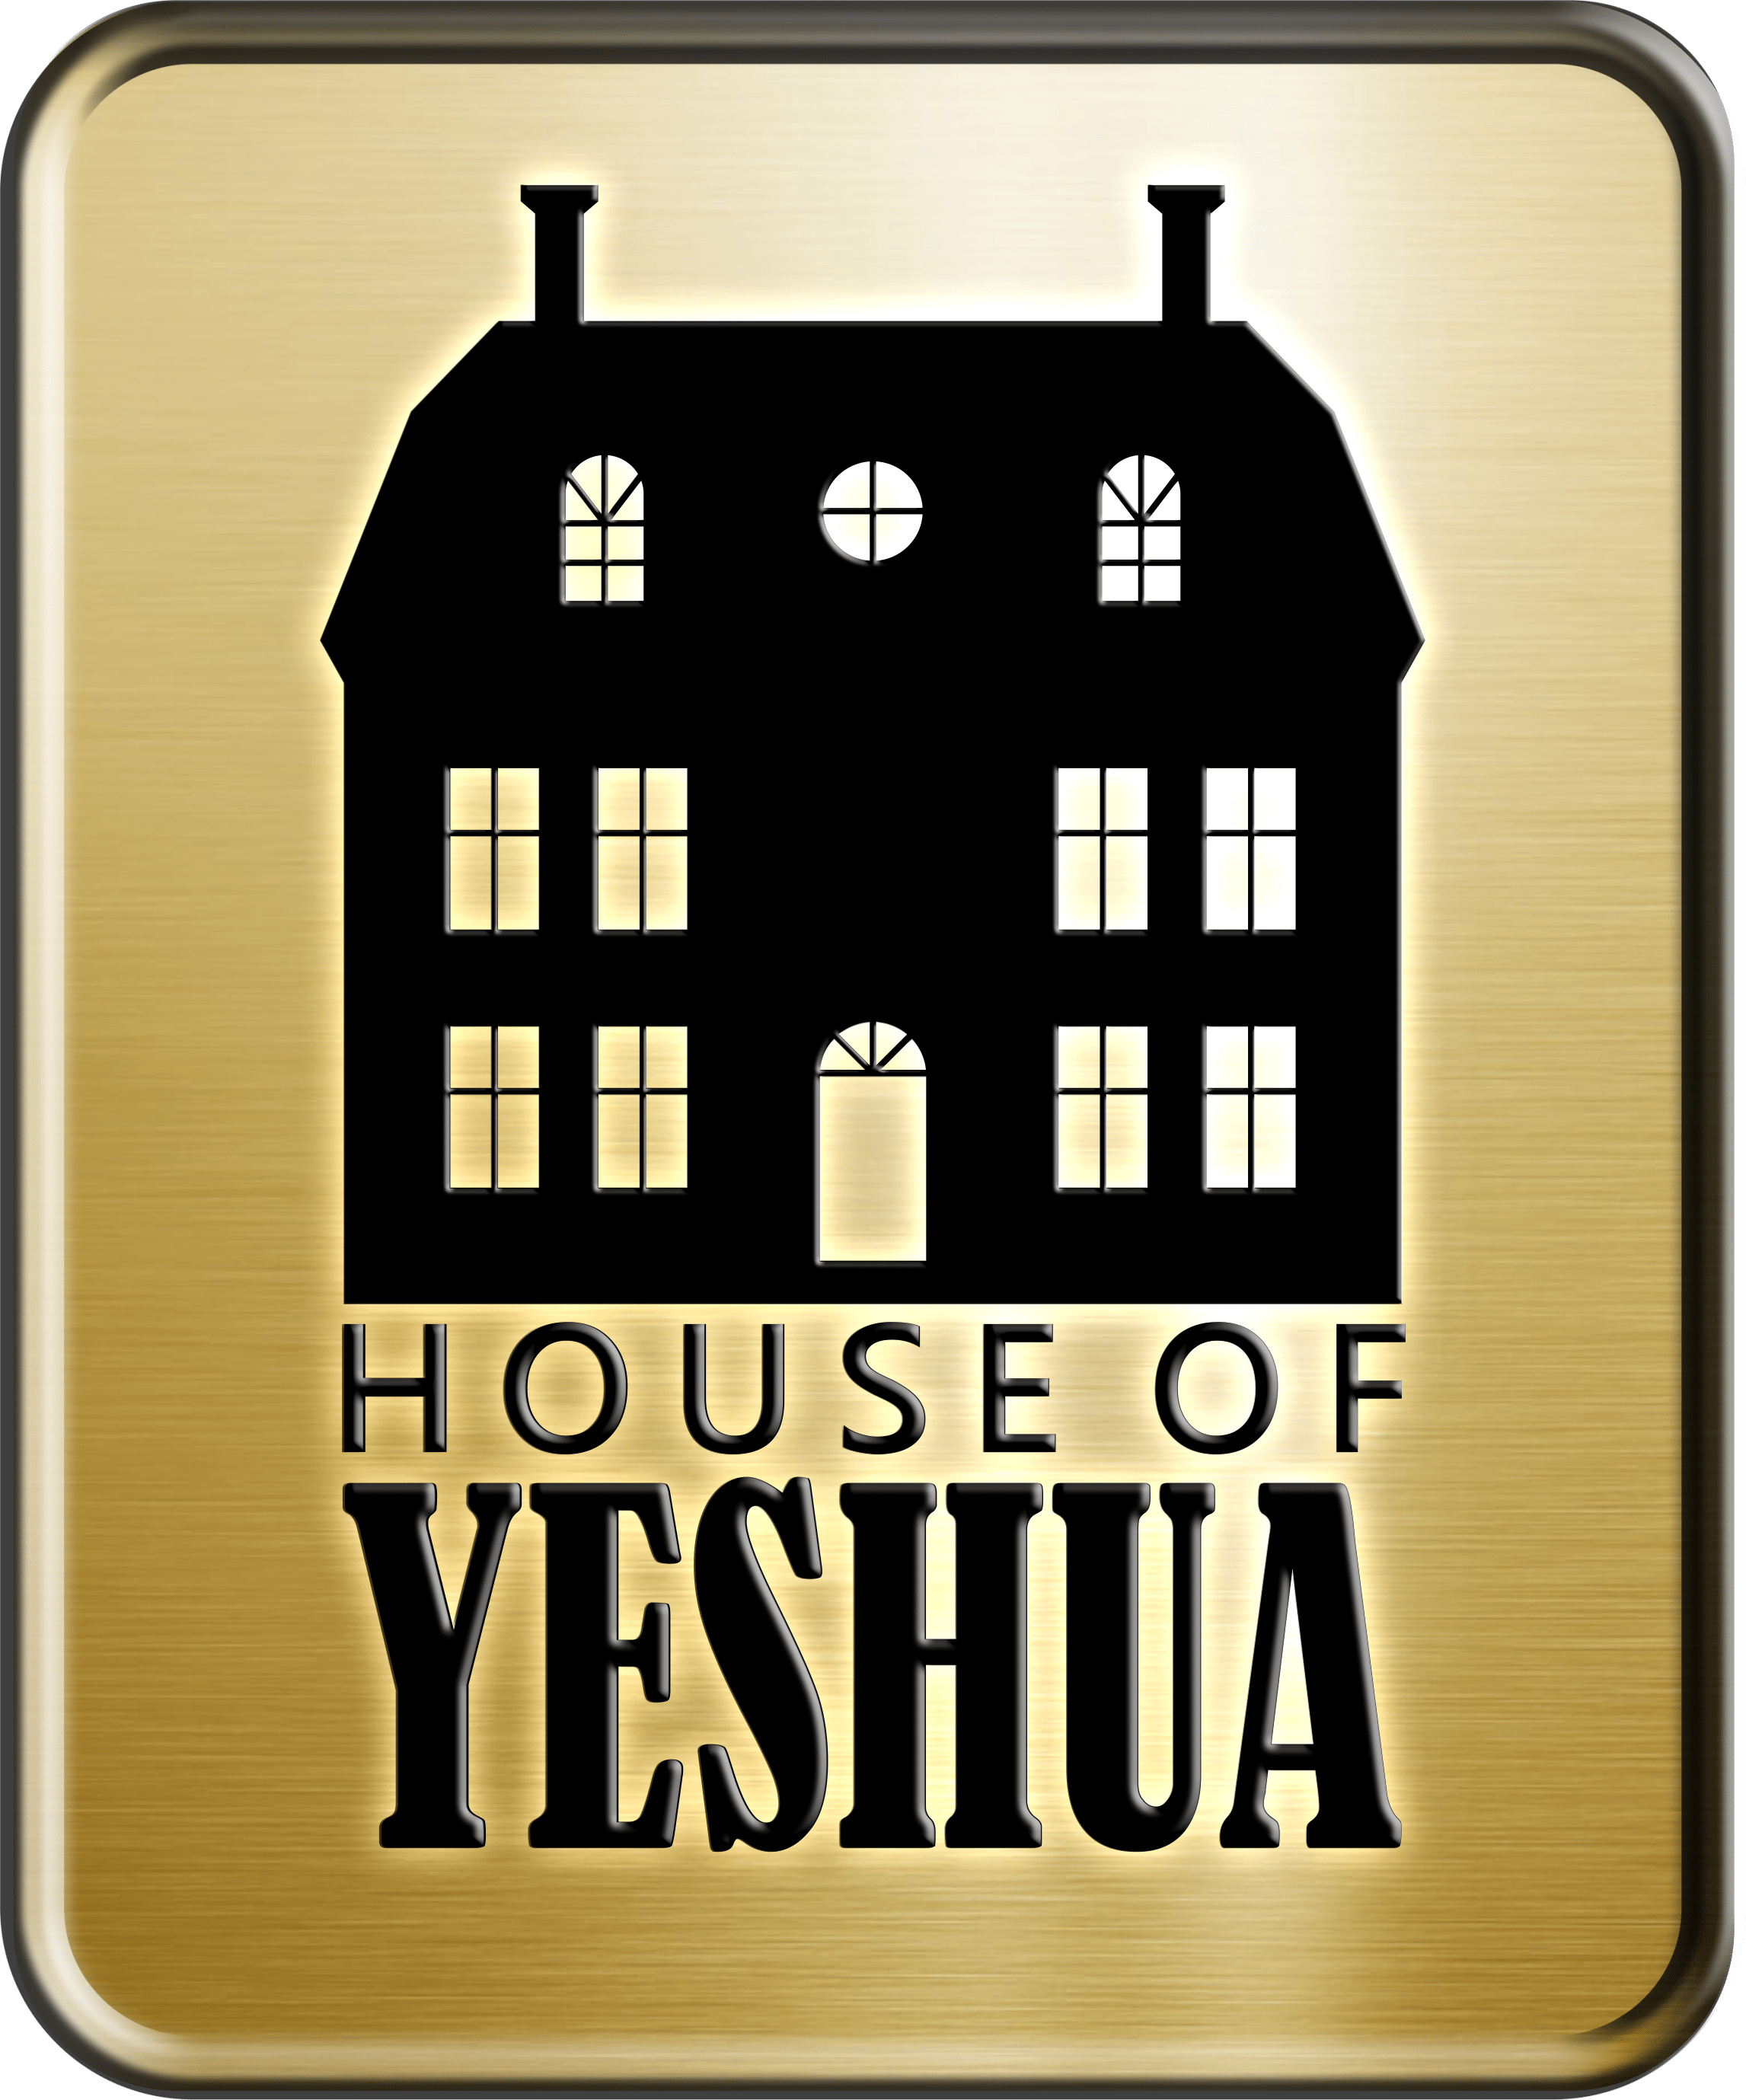 Building Yeshua’s House